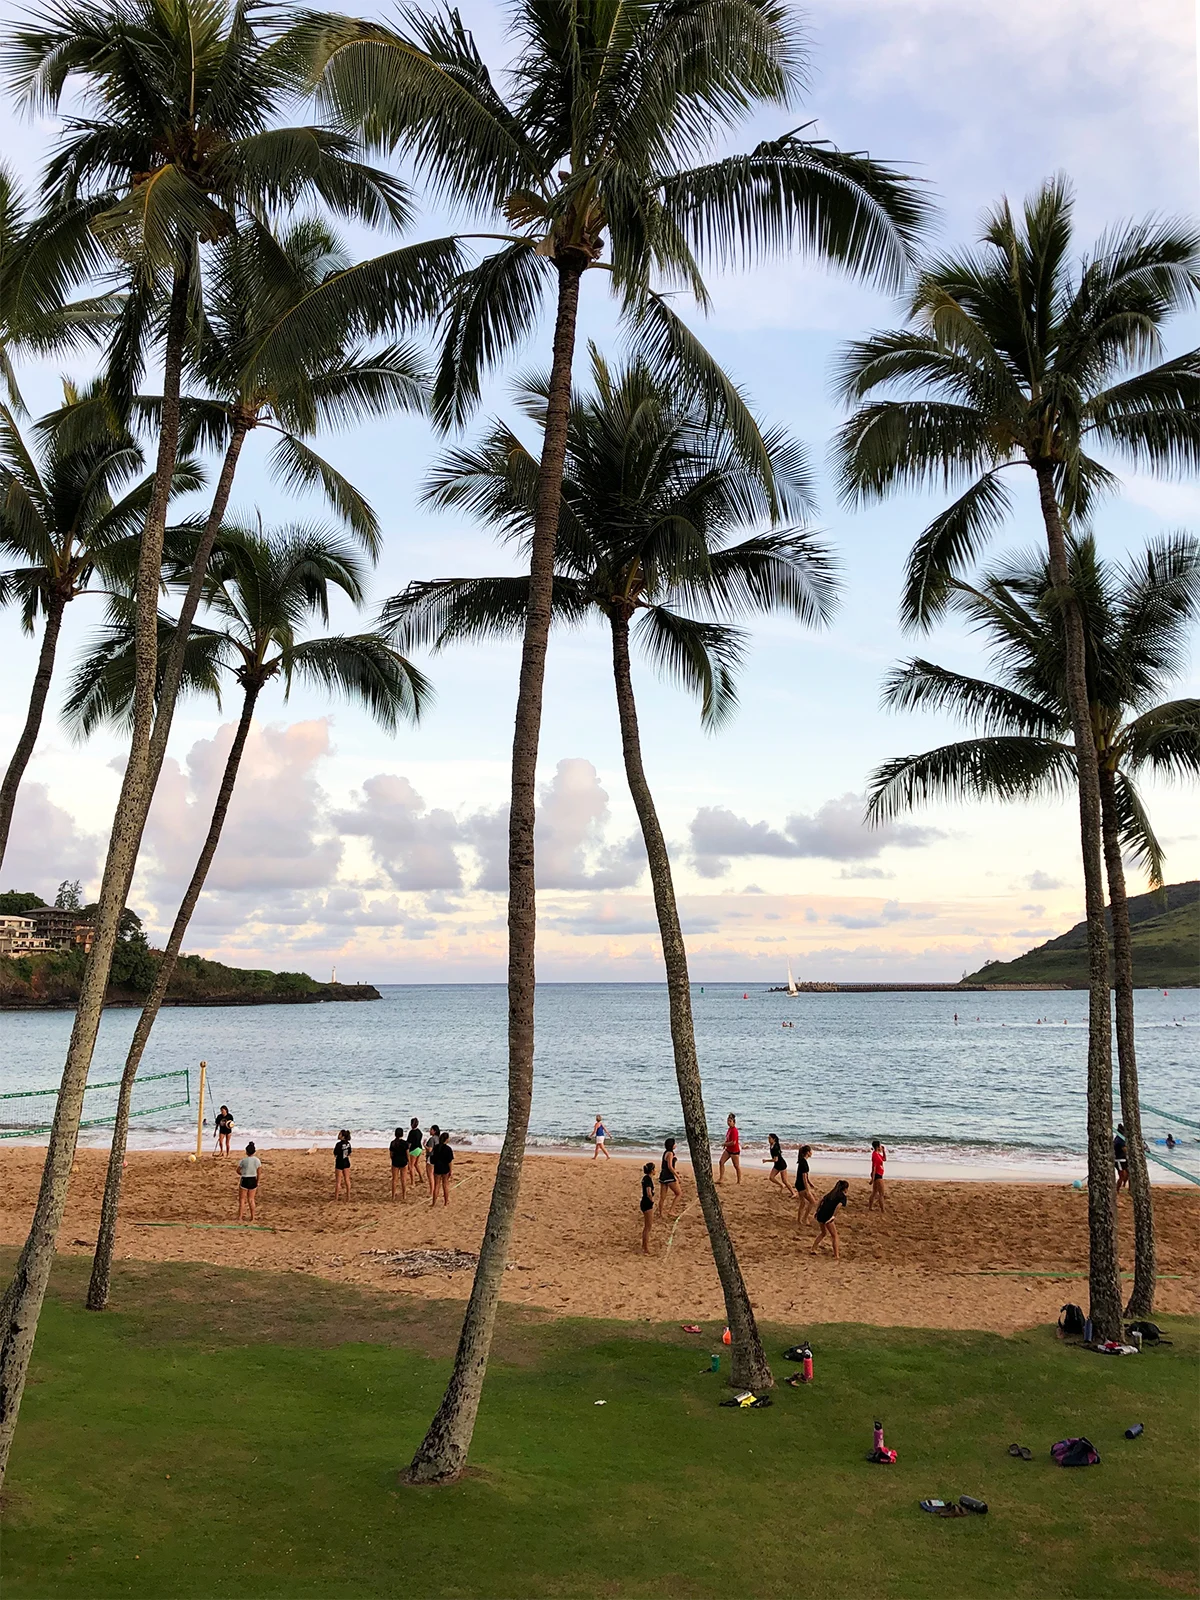 Best restaurants in kauai with a view dukes beach with palm trees at sunset